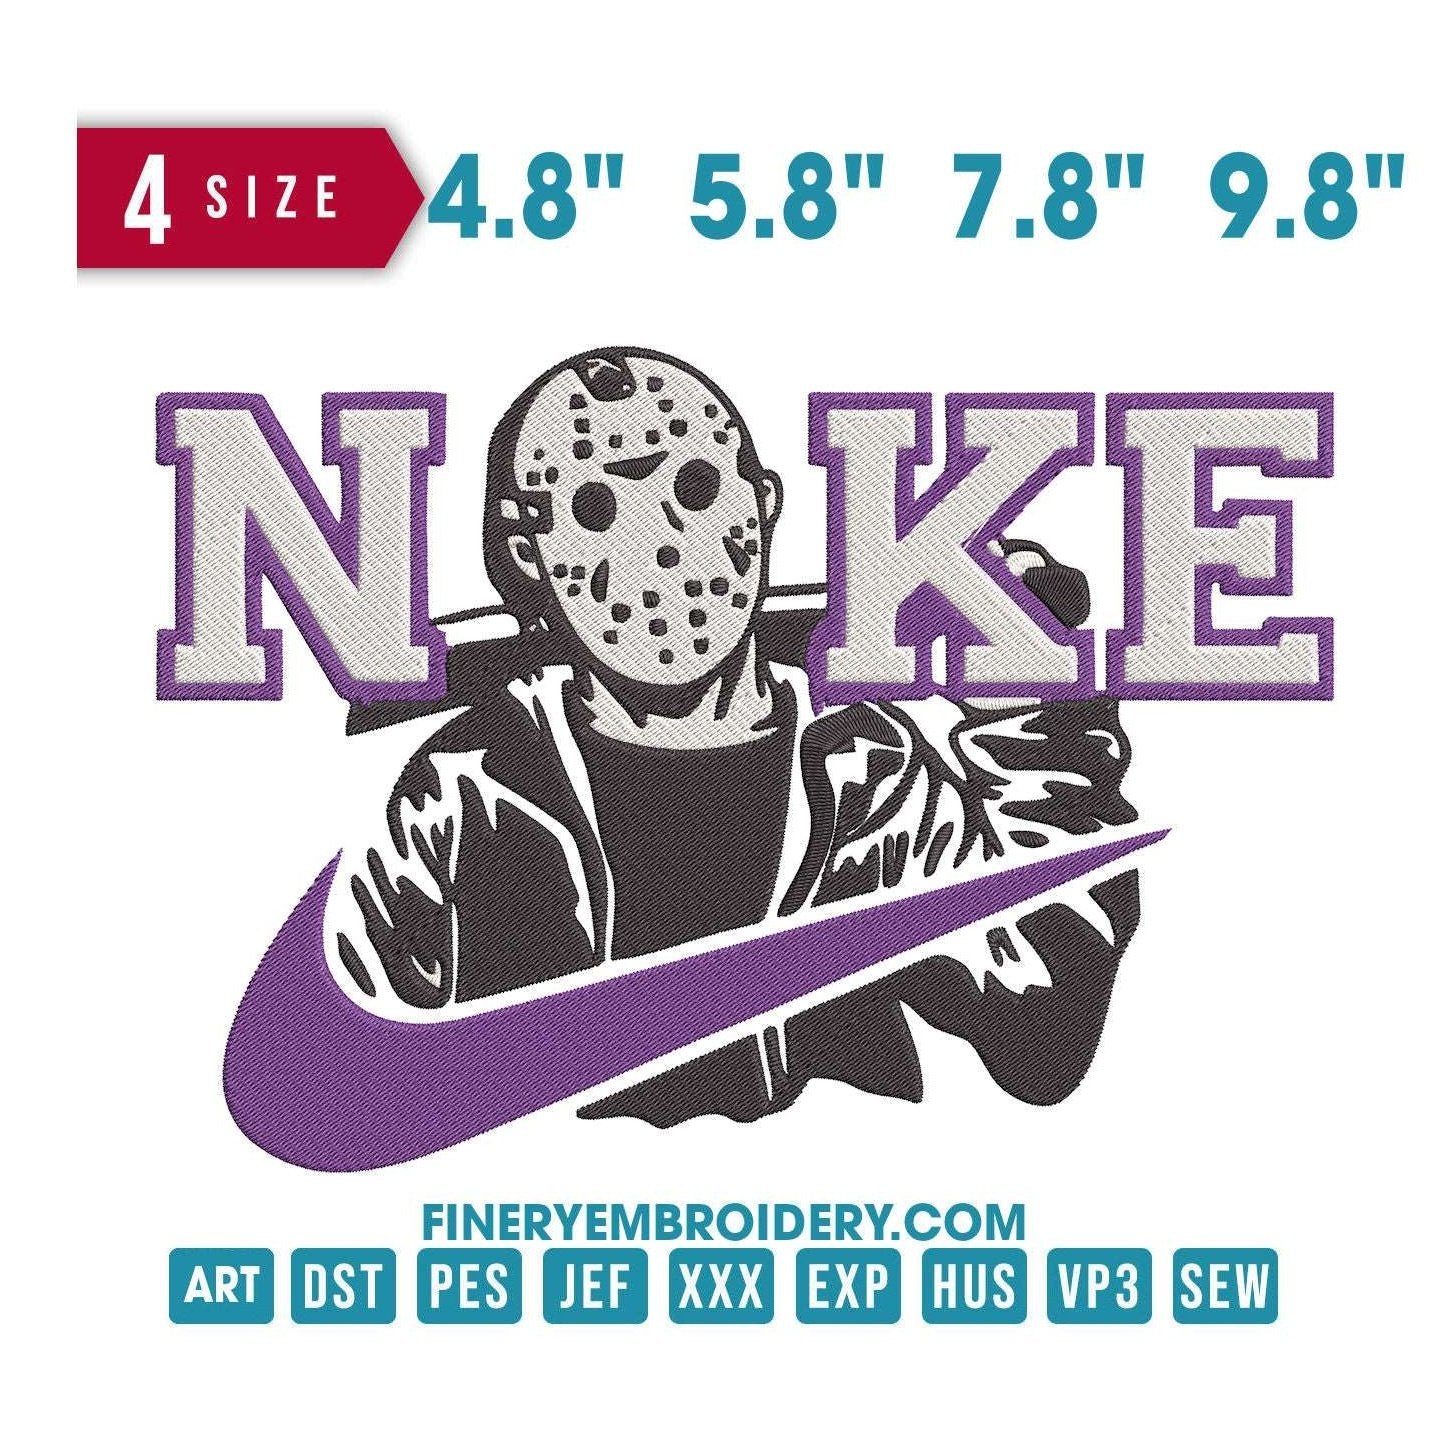 Nike Jason Voorhees - Embroidery Design FineryEmbroidery